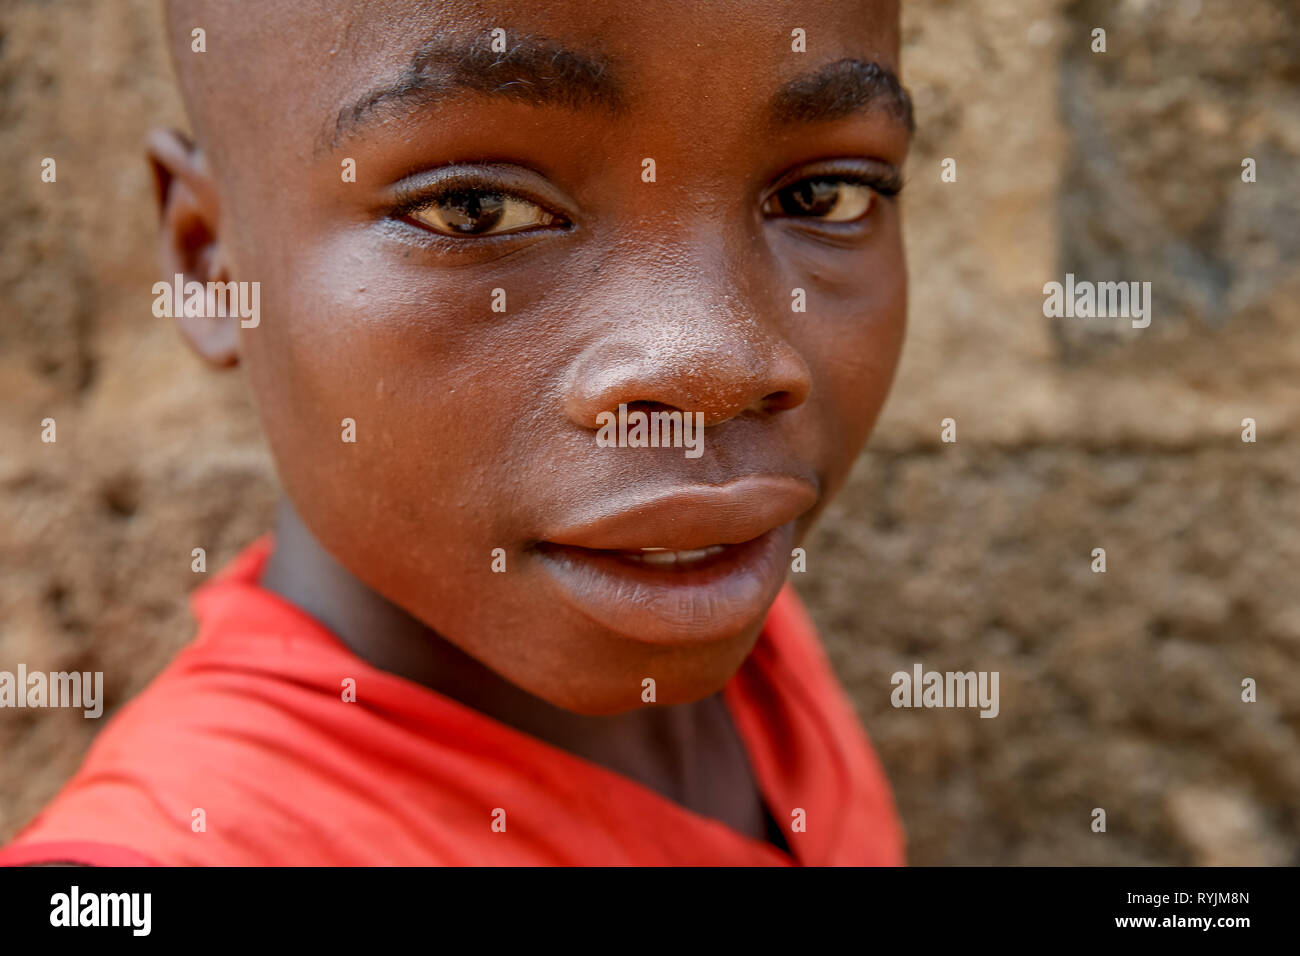 Boy in Agboville, Ivory Coast. Stock Photo